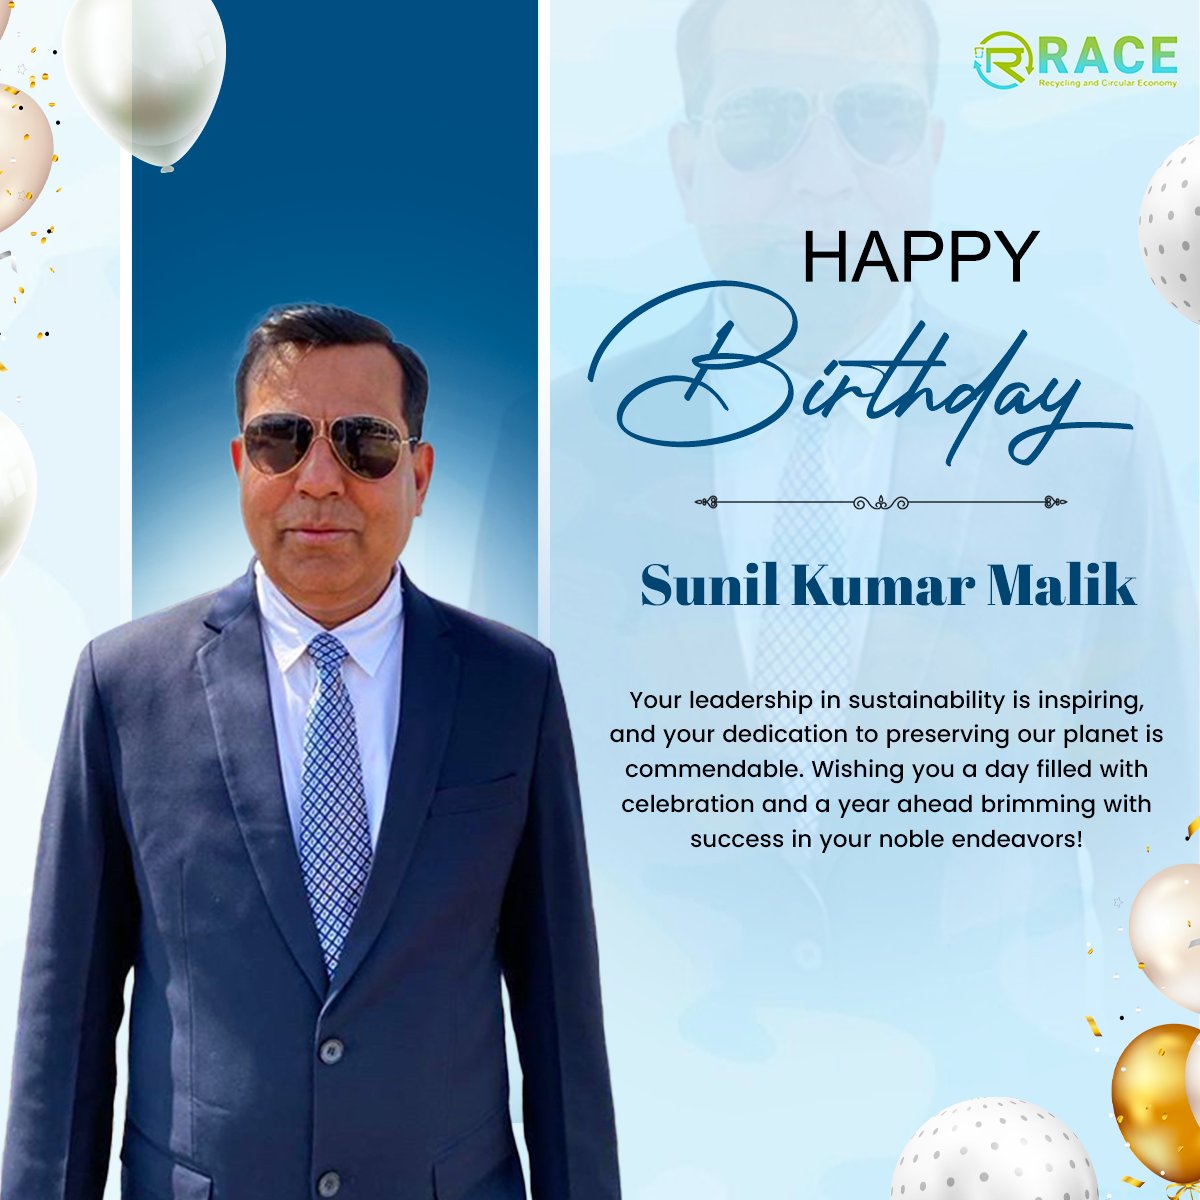 Happy Birthday to a leader who champions a greener future!  Mr Sumit Kumar Malik, your dedication to sustainability inspires us all. Here's to a day of celebration and a year filled with continued success in your important work!
 
#RaceEcoChain #SustainabilityLeader #EcoHero